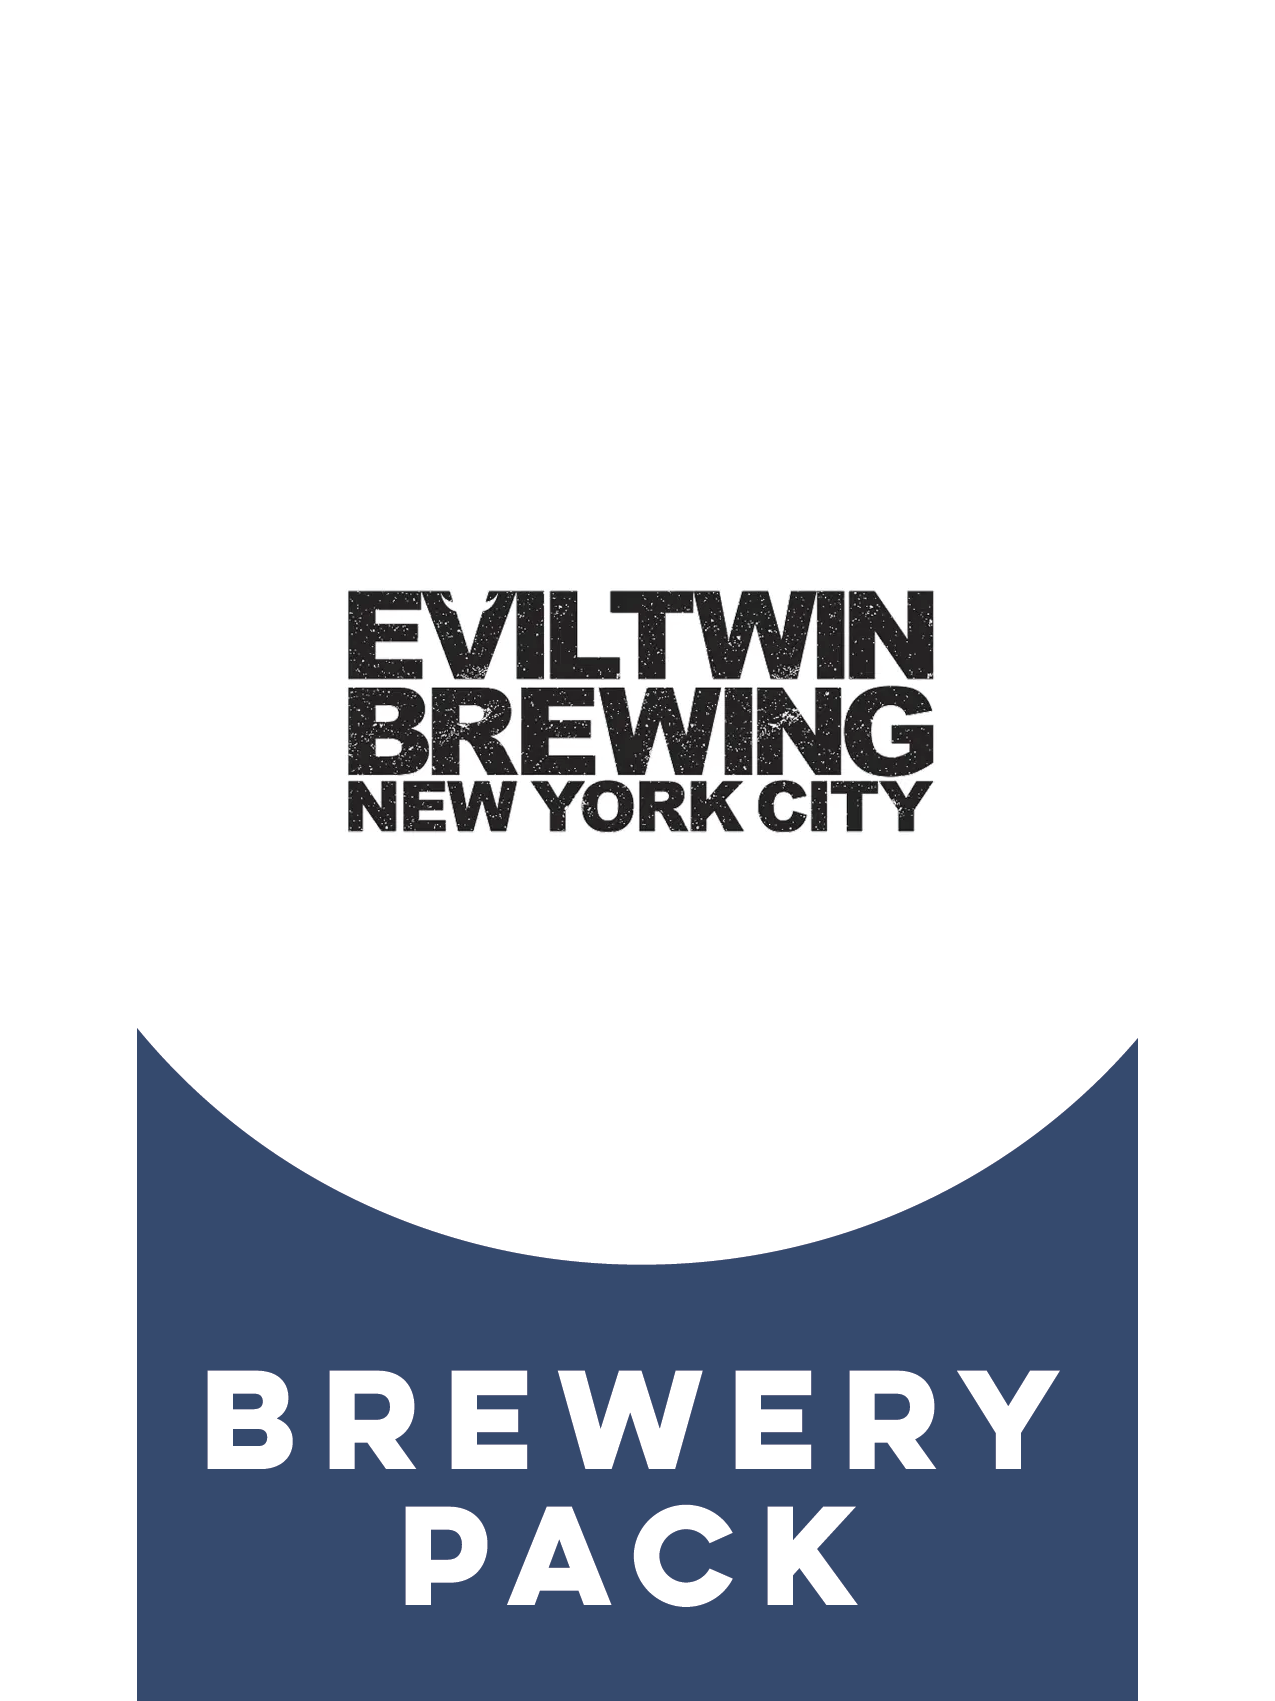 -Evil Twin- Evil Twin Brewery Pack Dark Edition-Packs & Cases- Only @ Beer Republic - The best online beer store for American & Canadian craft beer - Buy beer online from the USA and Canada - Bier online kopen - Amerikaans bier kopen - Craft beer store - Craft beer kopen - Amerikanisch bier kaufen - Bier online kaufen - Acheter biere online - IPA - Stout - Porter - New England IPA - Hazy IPA - Imperial Stout - Barrel Aged - Barrel Aged Imperial Stout - Brown - Dark beer - Blond - Blonde - Pilsner - Lager - 